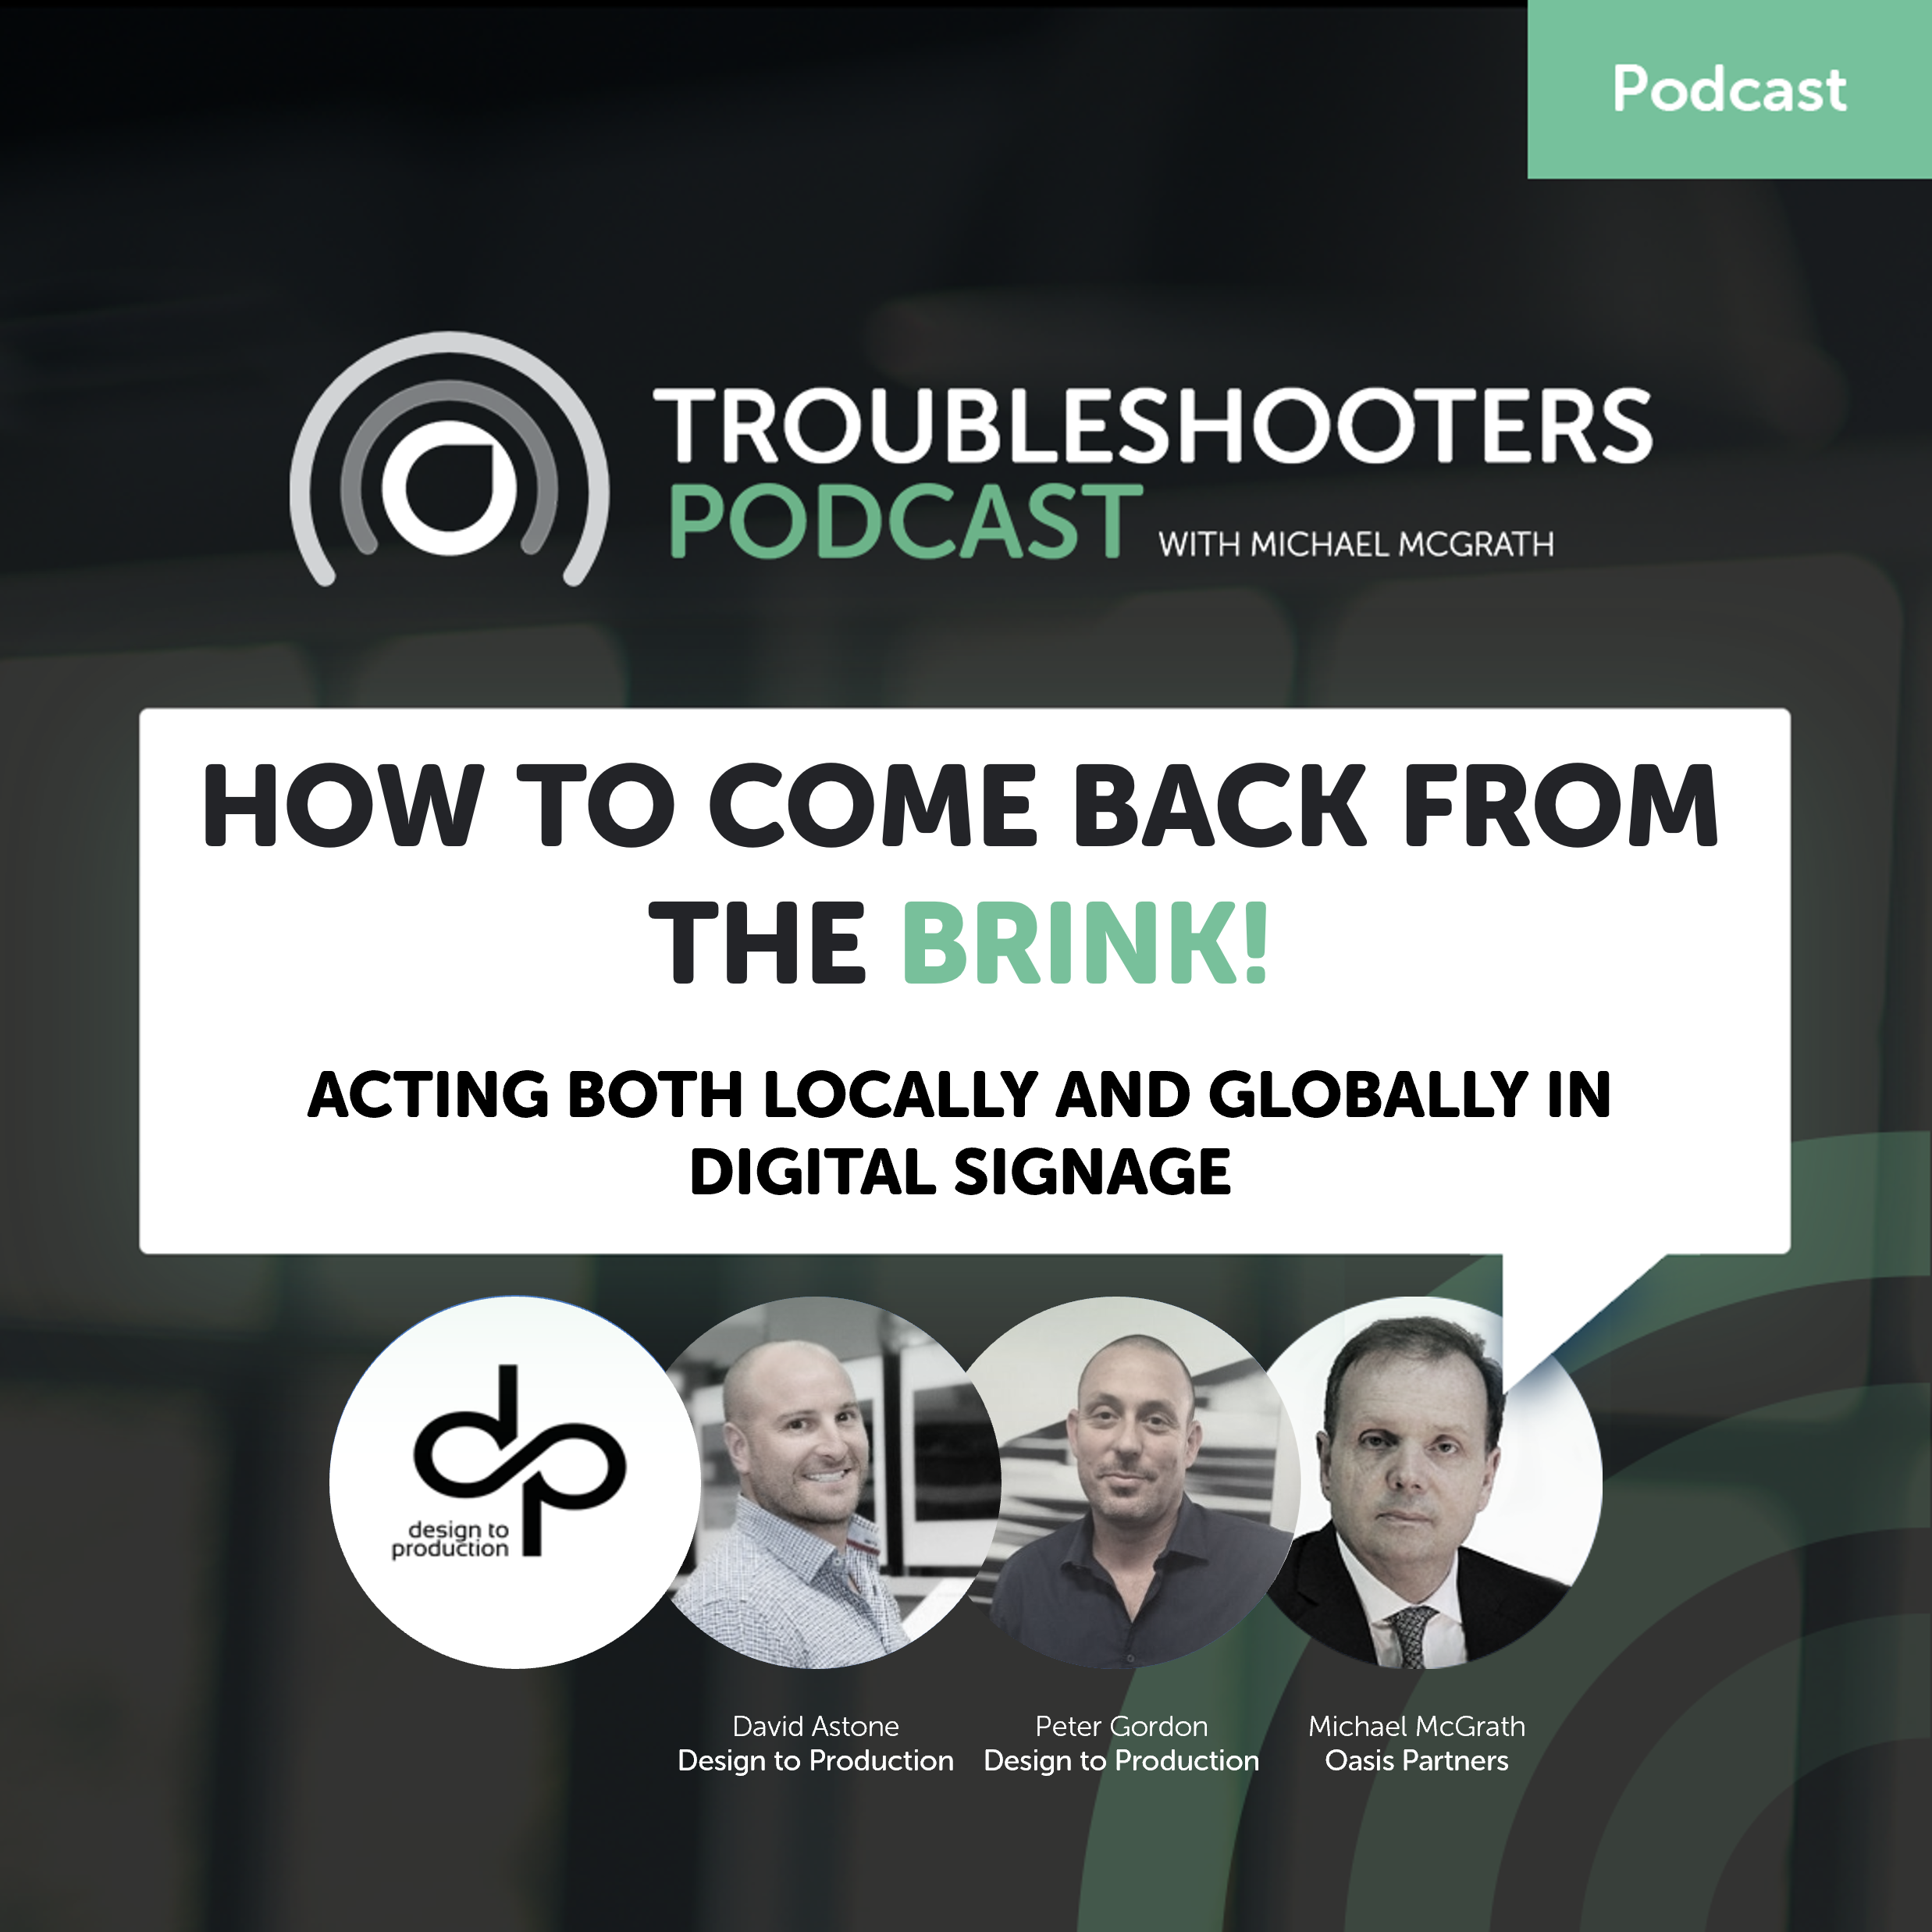 Troubleshooters Podcast - Design to Production